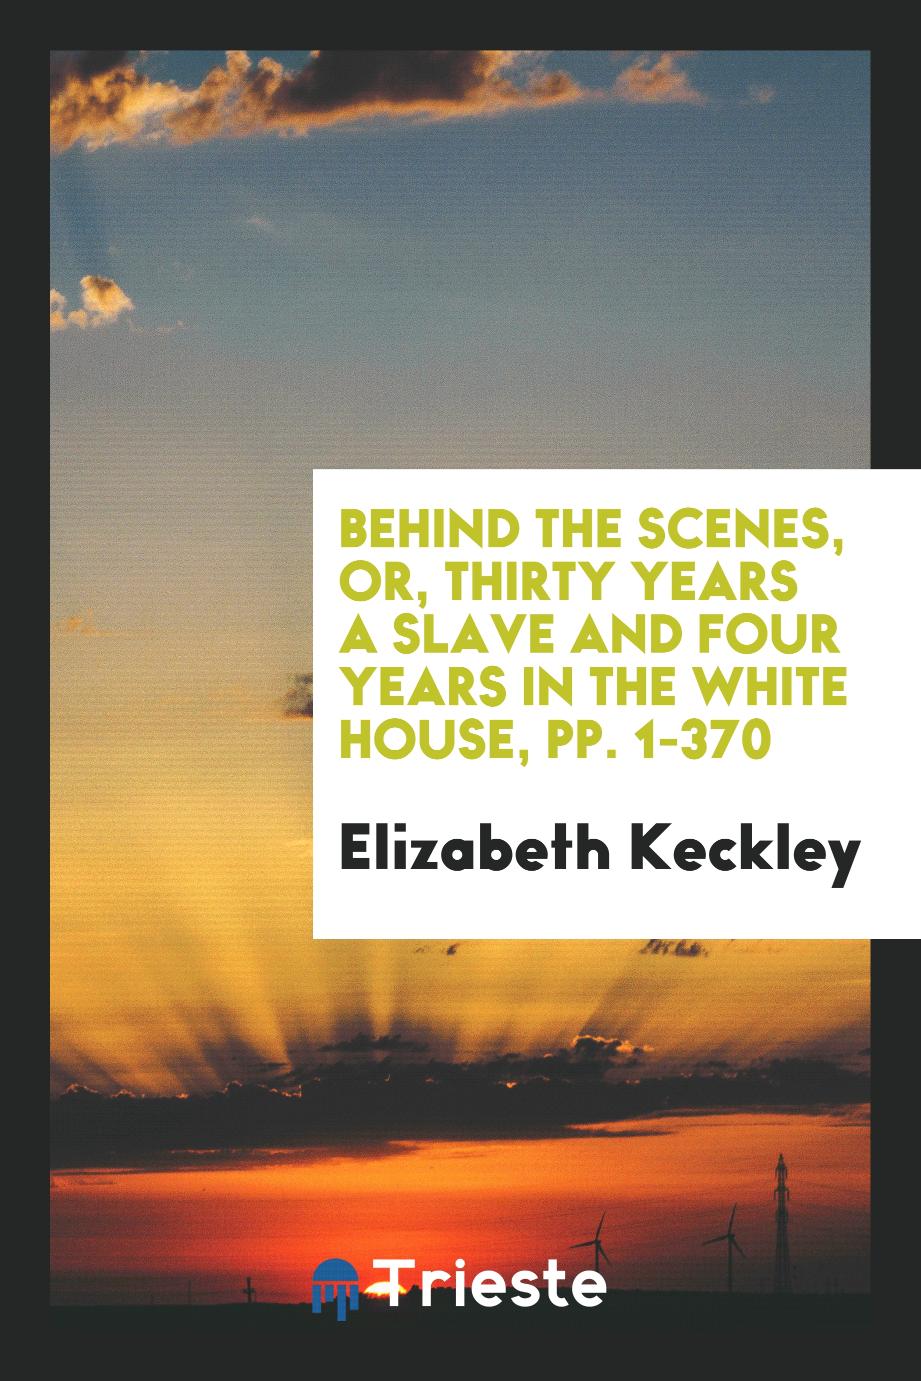 Behind the Scenes, or, Thirty Years a Slave and Four Years in the White House, pp. 1-370